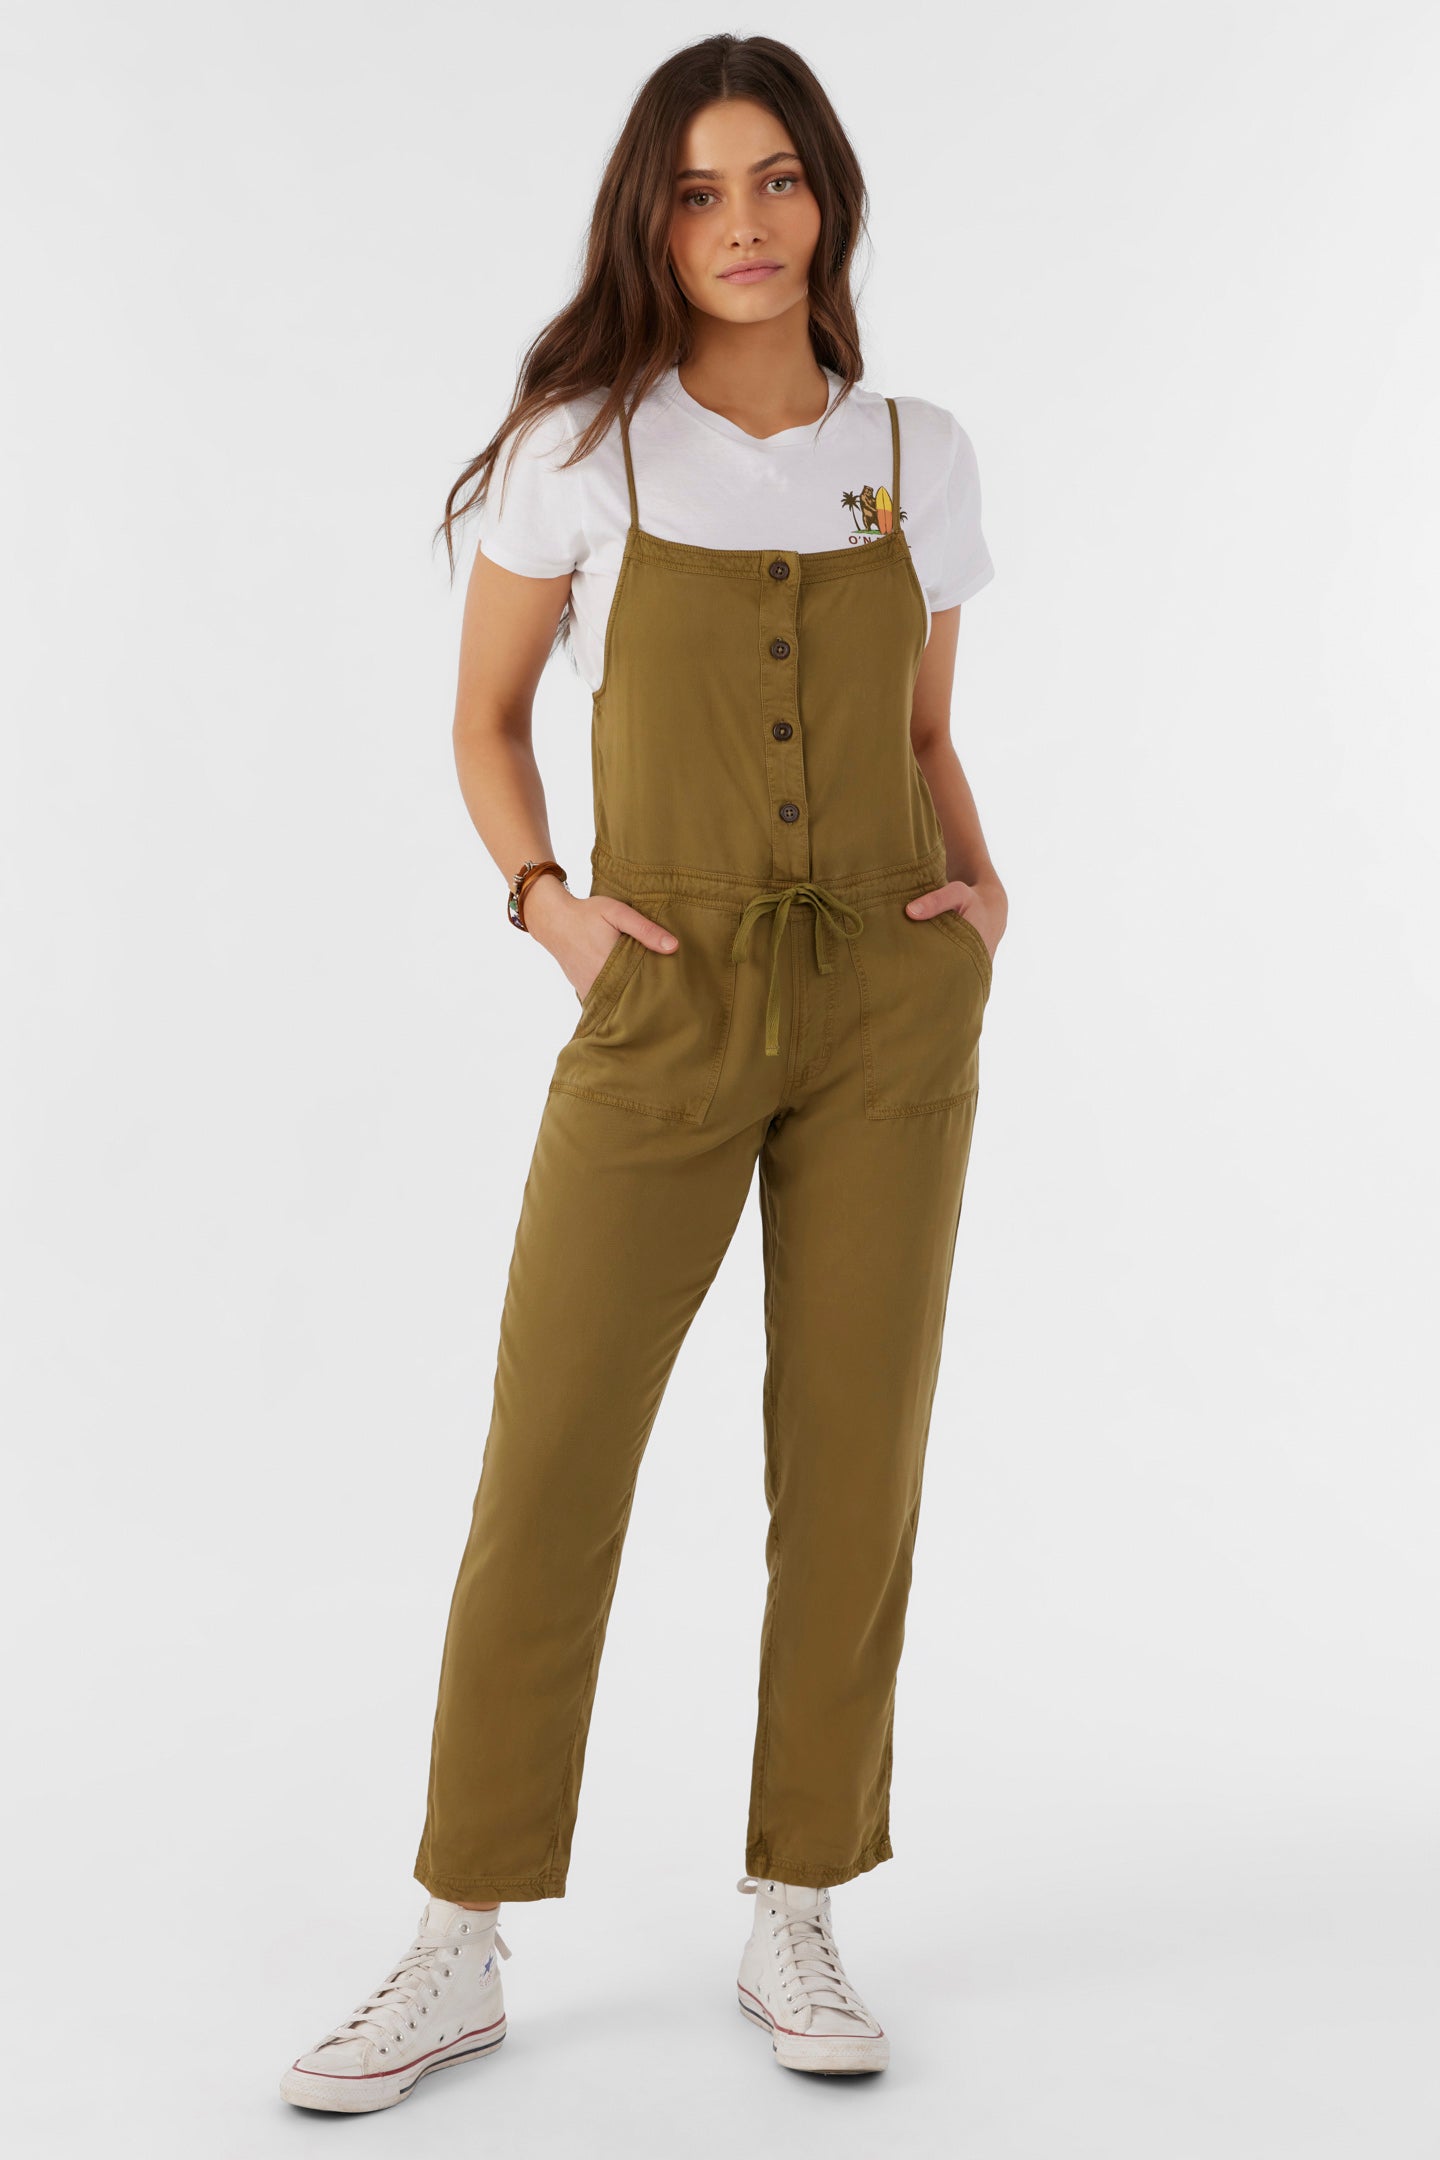 Francina Twill Jumpsuit - Olive | O'Neill